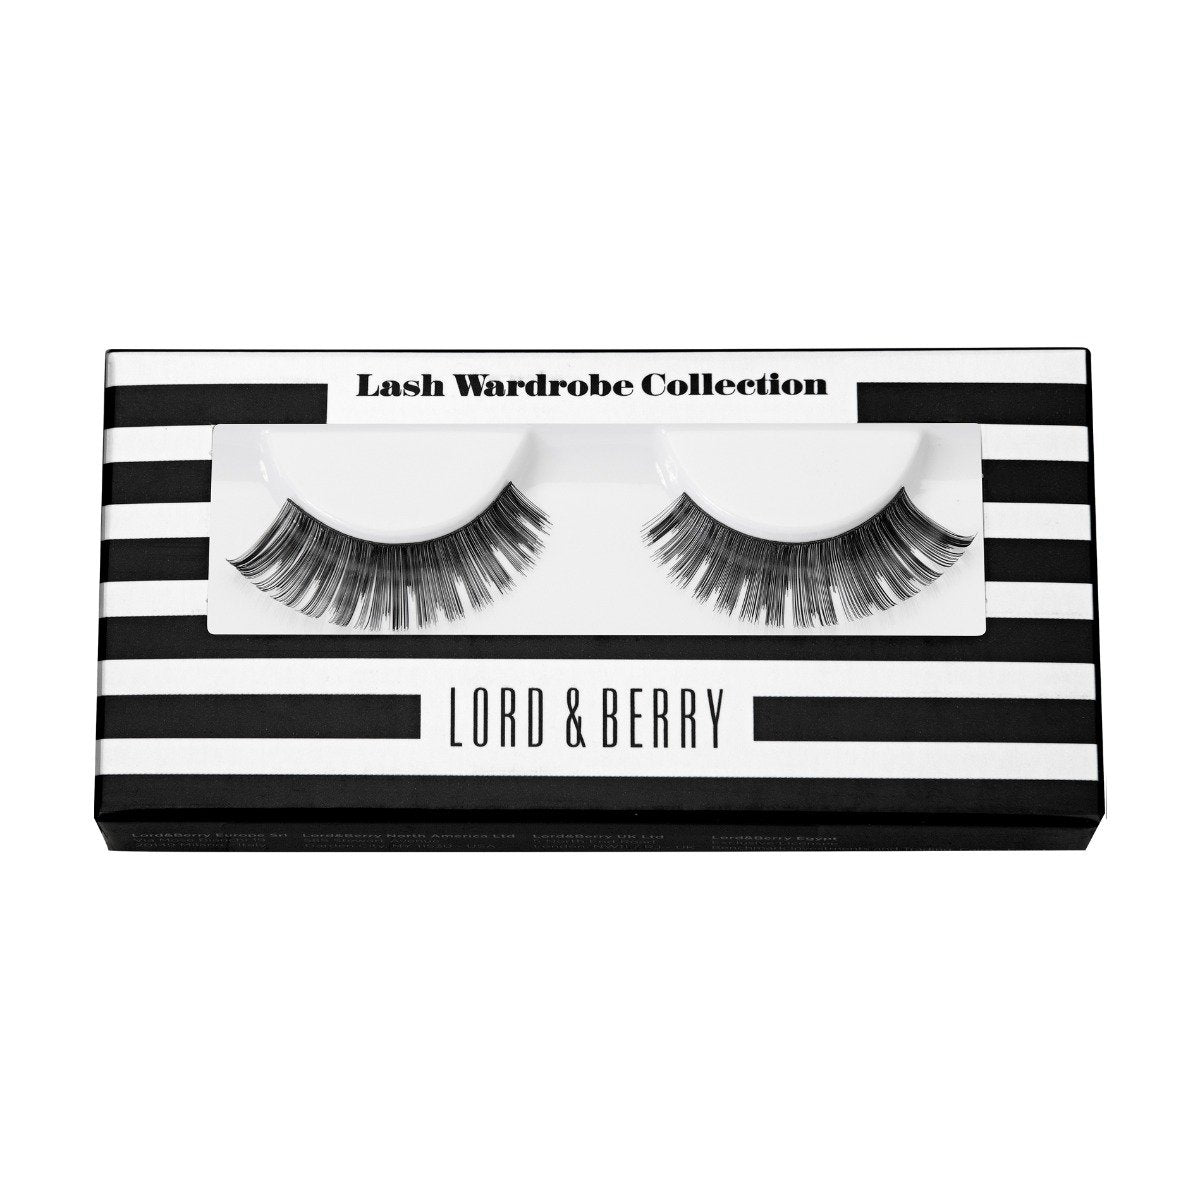 Lord & Berry Eyelashes Wardrobe Collection - EL12 - Bloom Pharmacy